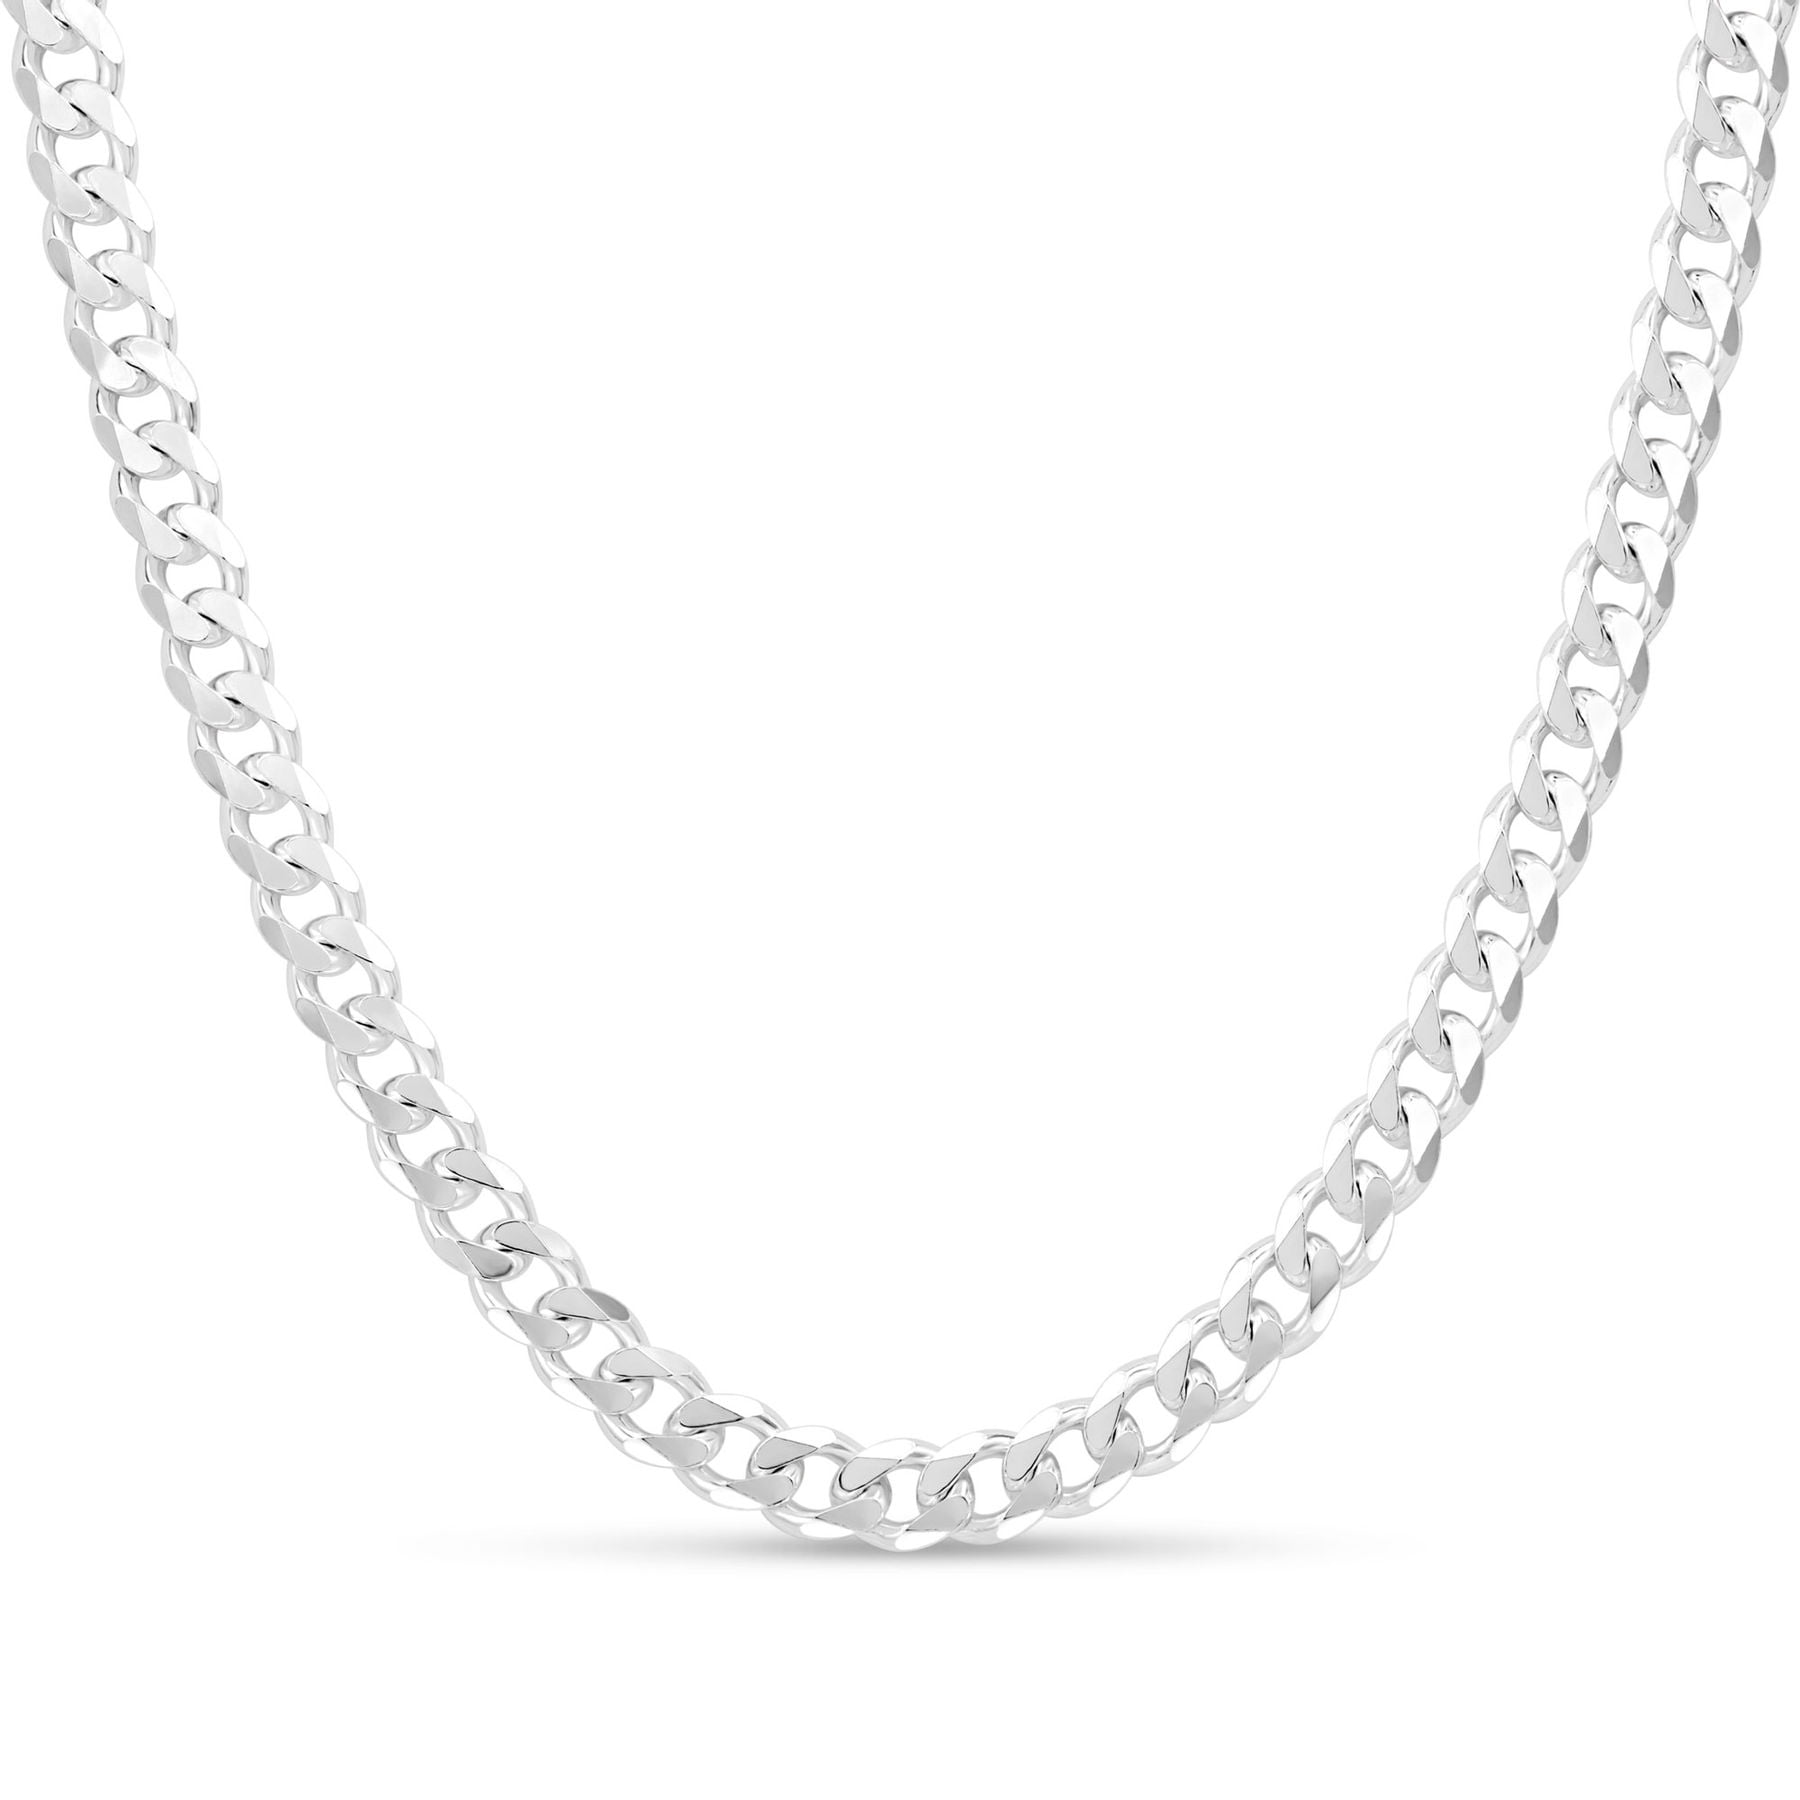 Pure S925 Sterling Silver Curb Chain 6mm Cuban Link Chain Necklace 20inch L